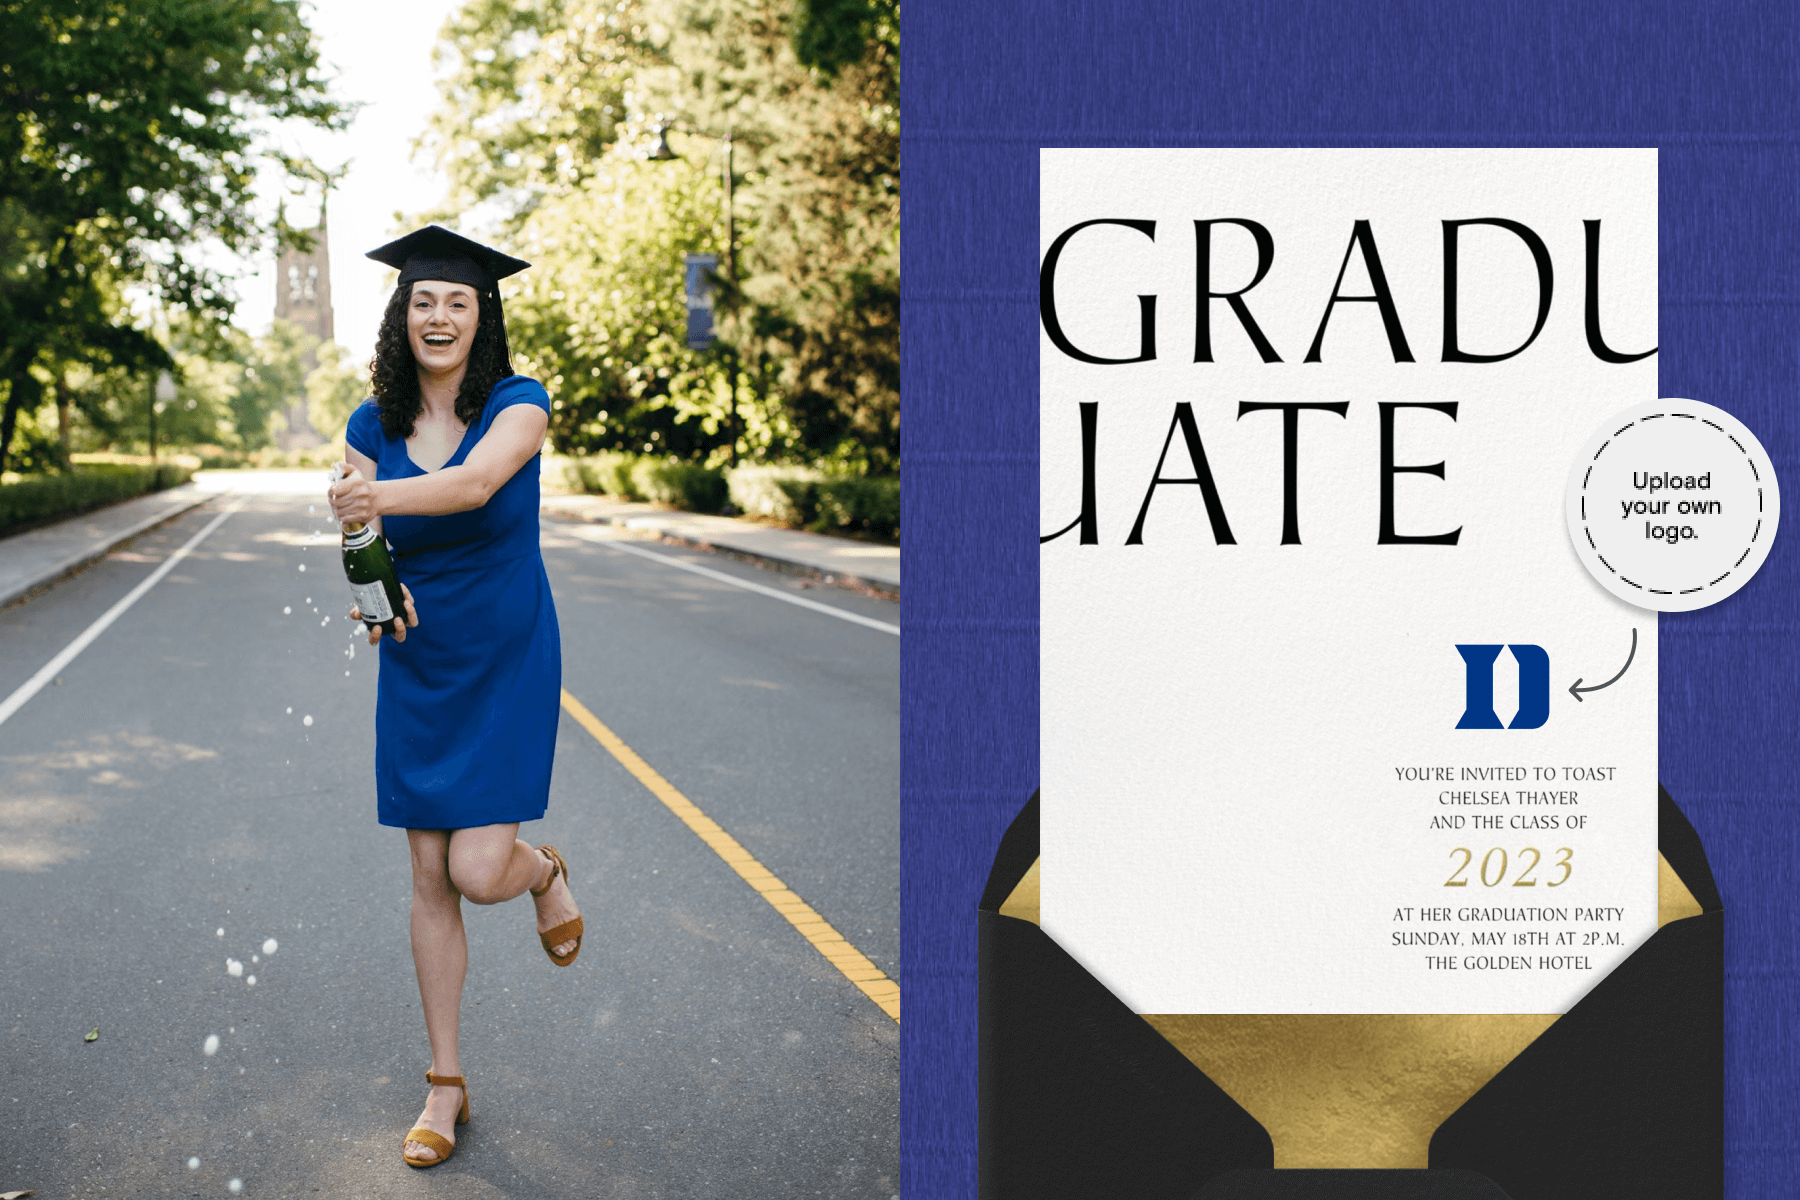 left: A young woman in a blue dress and black mortarboard hat pops open a bottle of sparkling wine on a street. Right: A white graduation party invitation on a blue background has the word GRADUATE split across the top with a blue logo for Duke University.